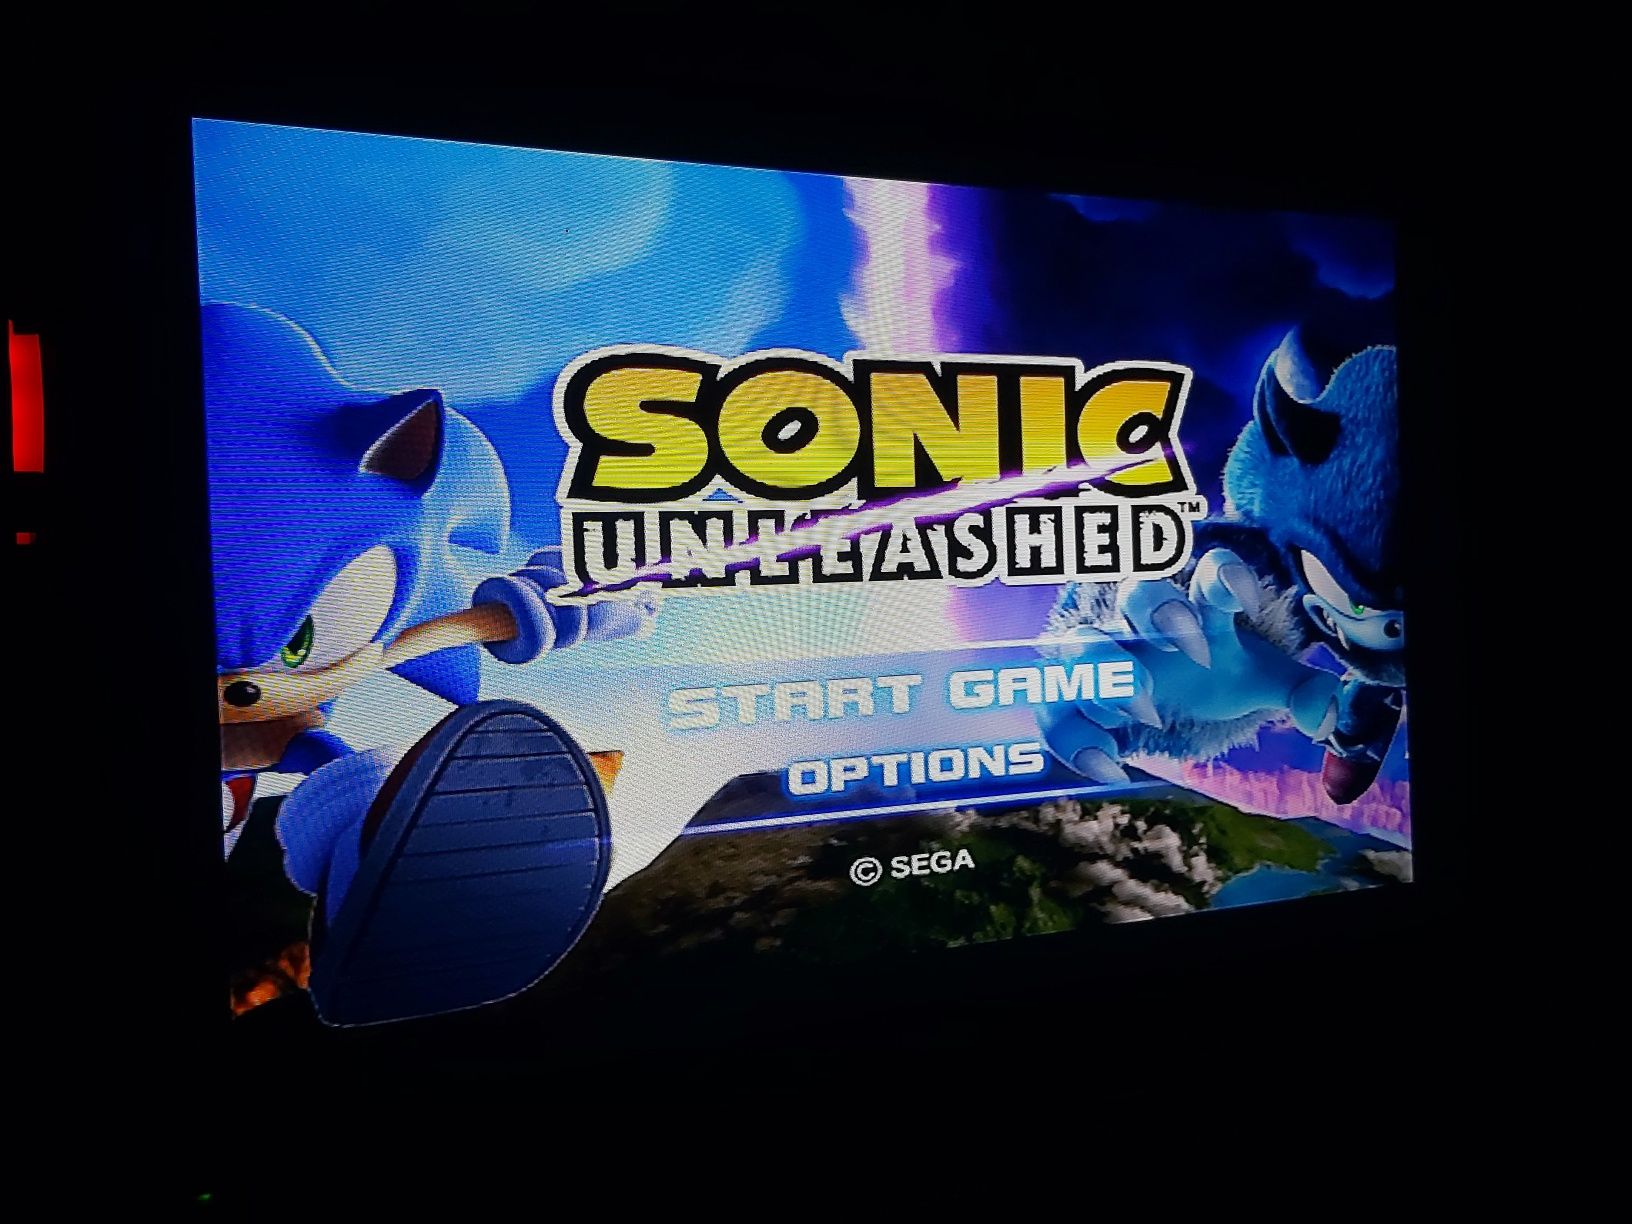 Sonic: Unleashed Playstation 2 (PS2)